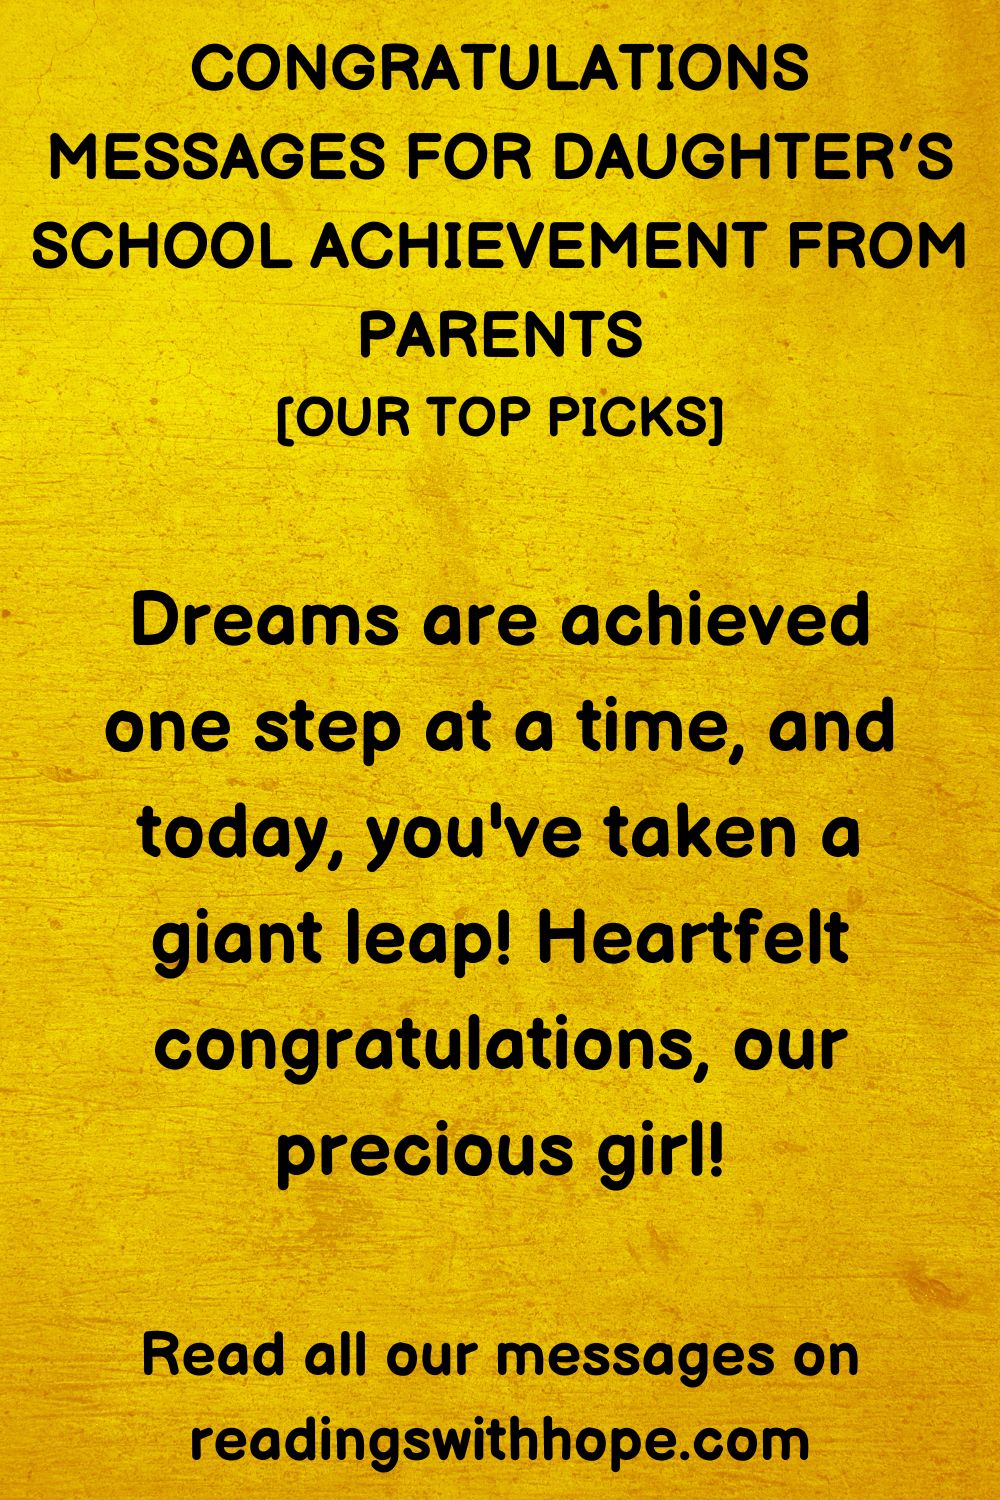 Congratulations Message for Daughter’s School Achievement From Parents
